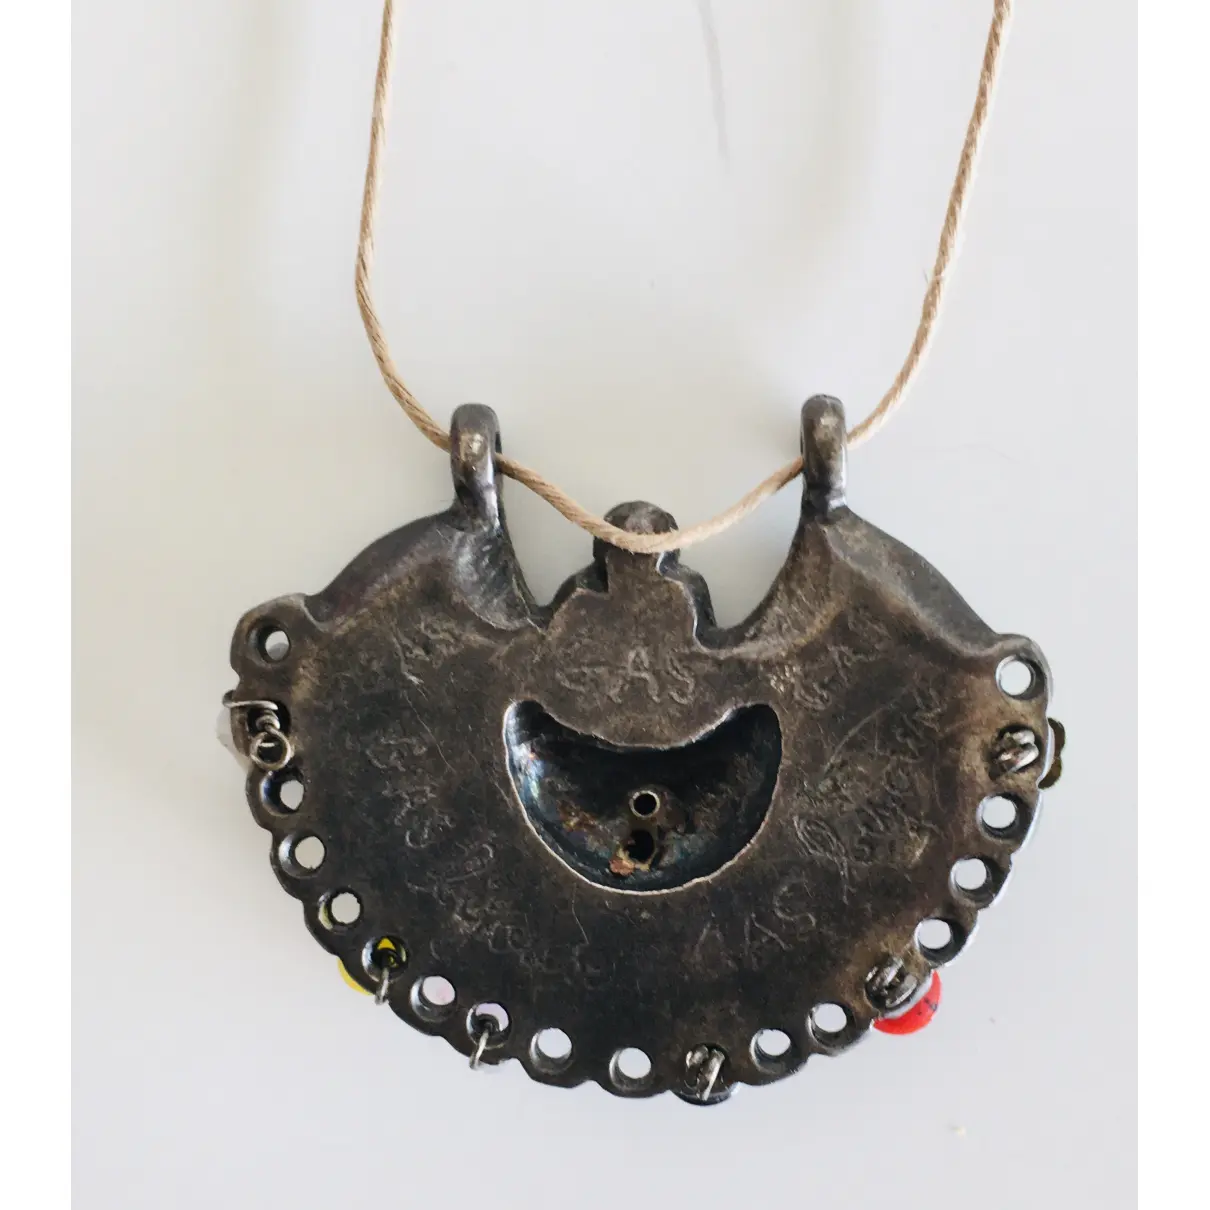 Buy Gas Necklace online